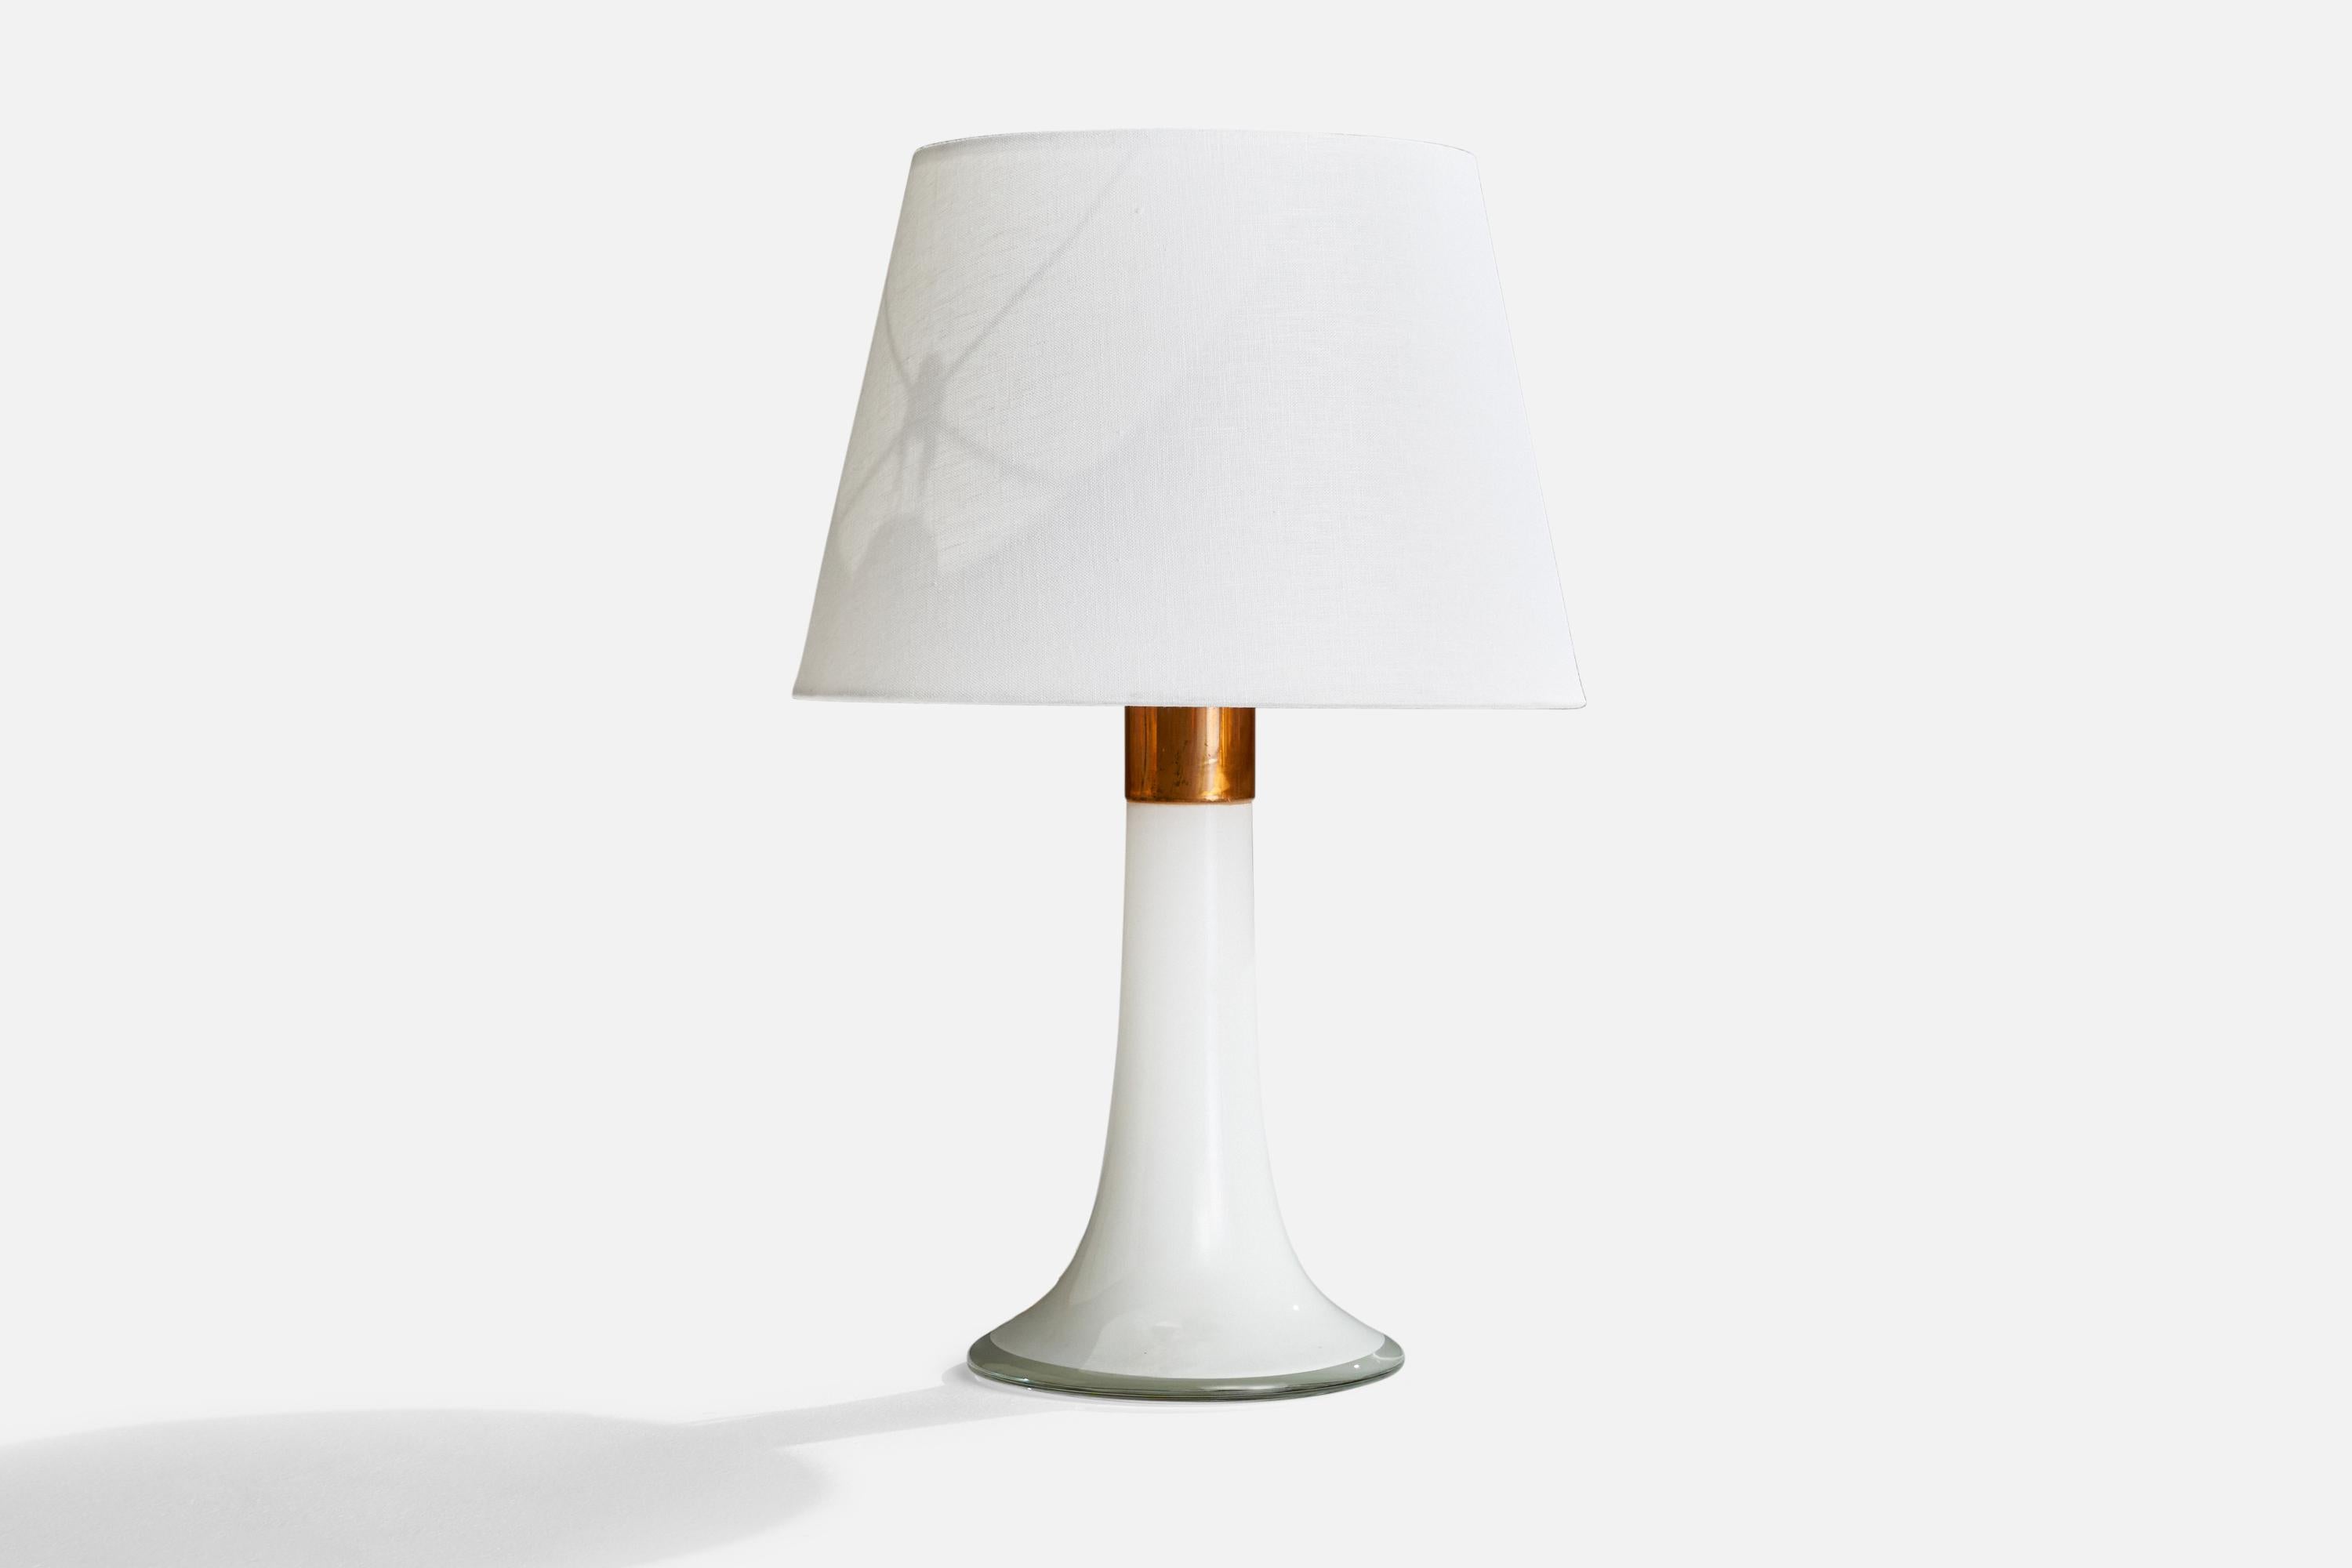 A white-colored glass and copper table lamp designed by Lisa Johansson-Pape and produced by Ornö, Finland, 1960s.

Dimensions of Lamp (inches): 15” H x 8.25”  Diameter
Dimensions of Shade (inches): 10